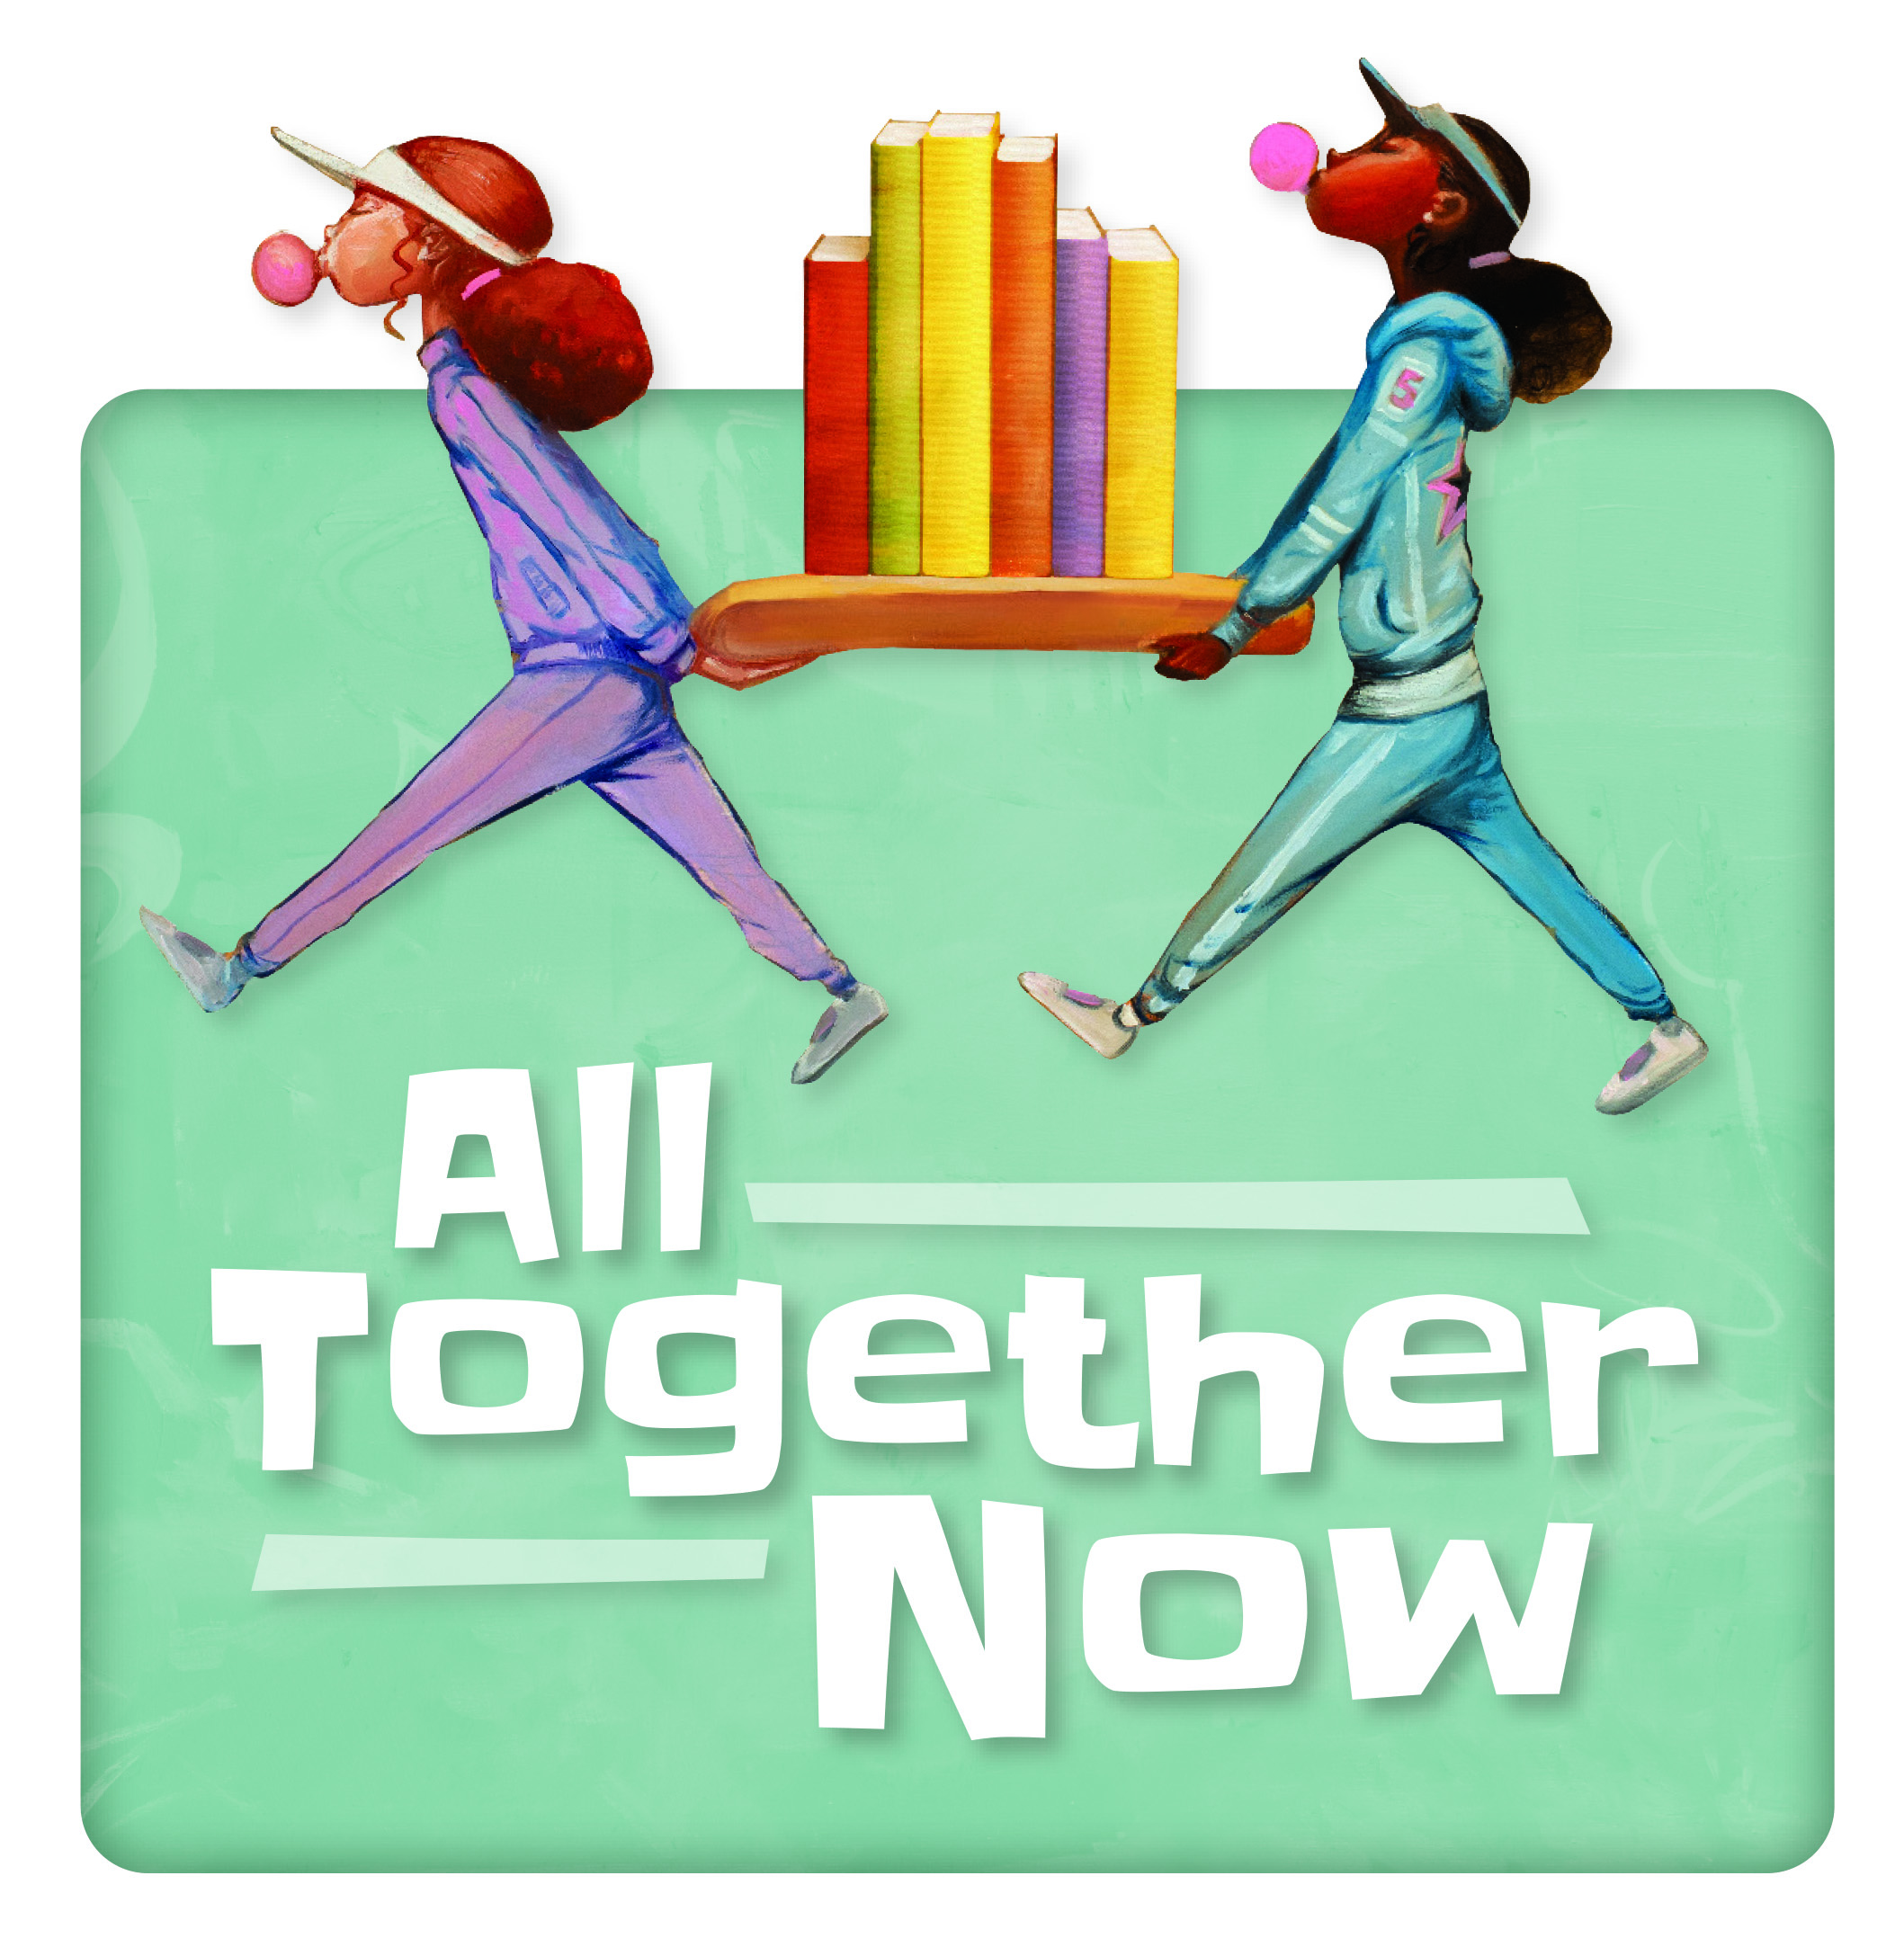 All Together Now logo with words and image of girls carrying books together.